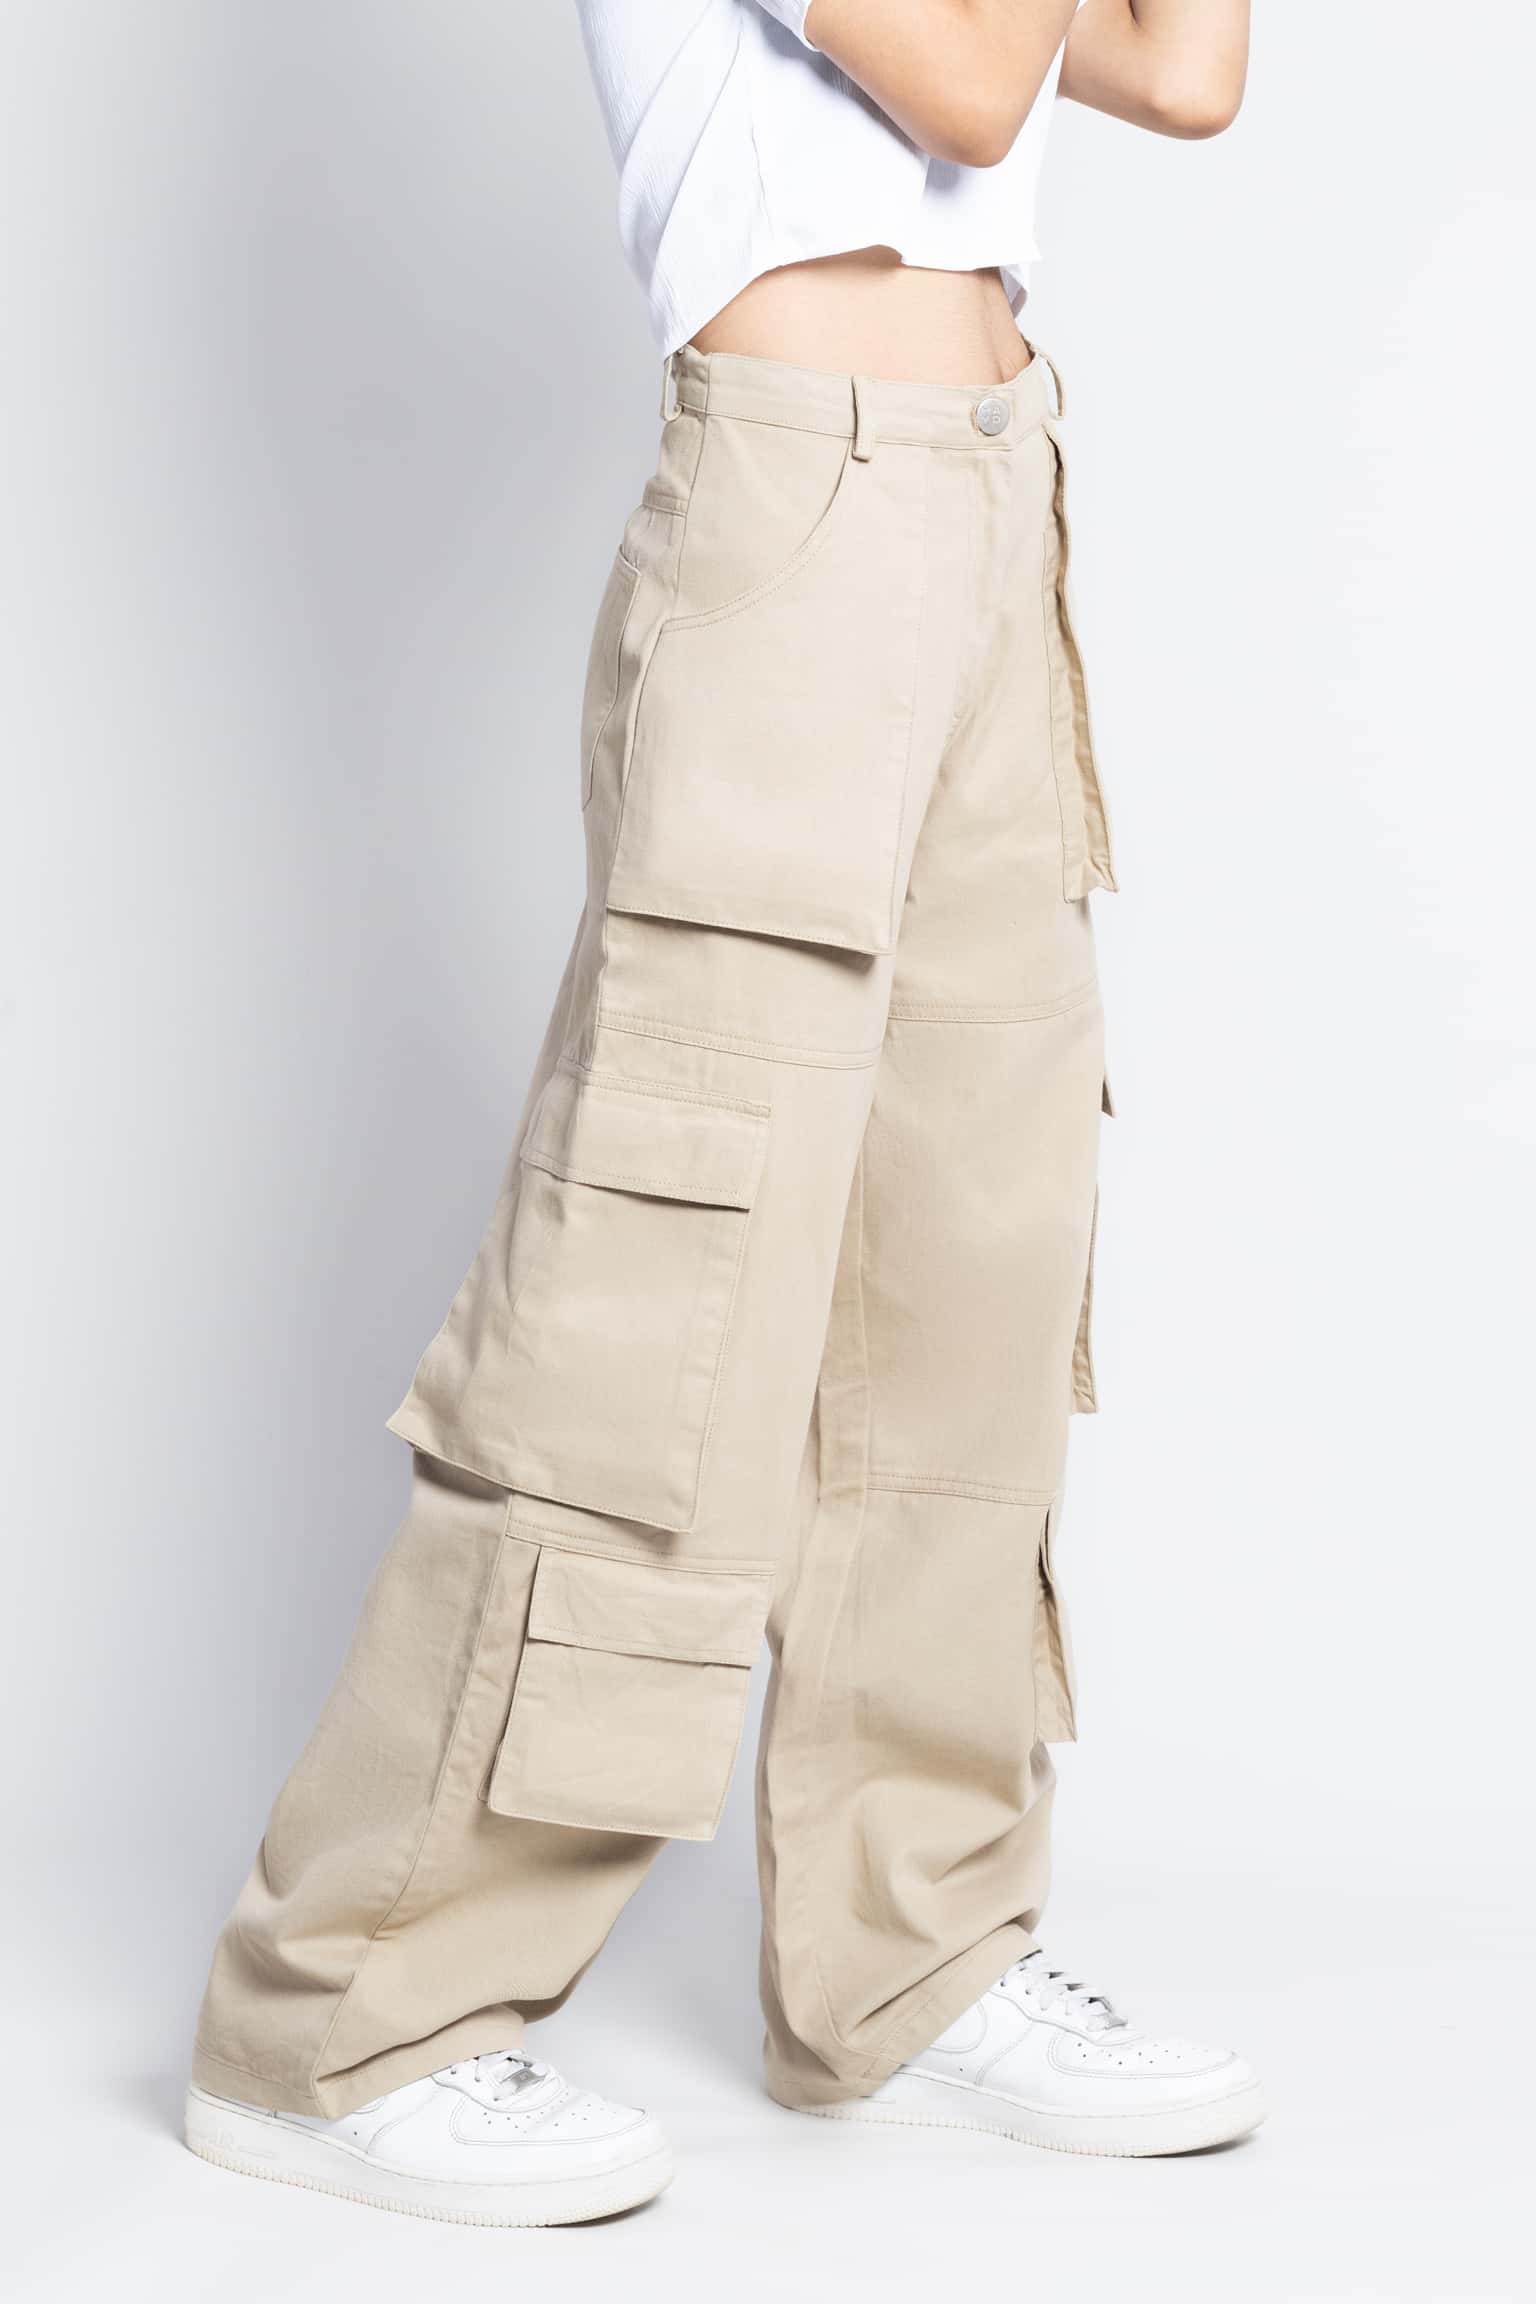 Cargo pants & shirts you'll live in - Wyse London